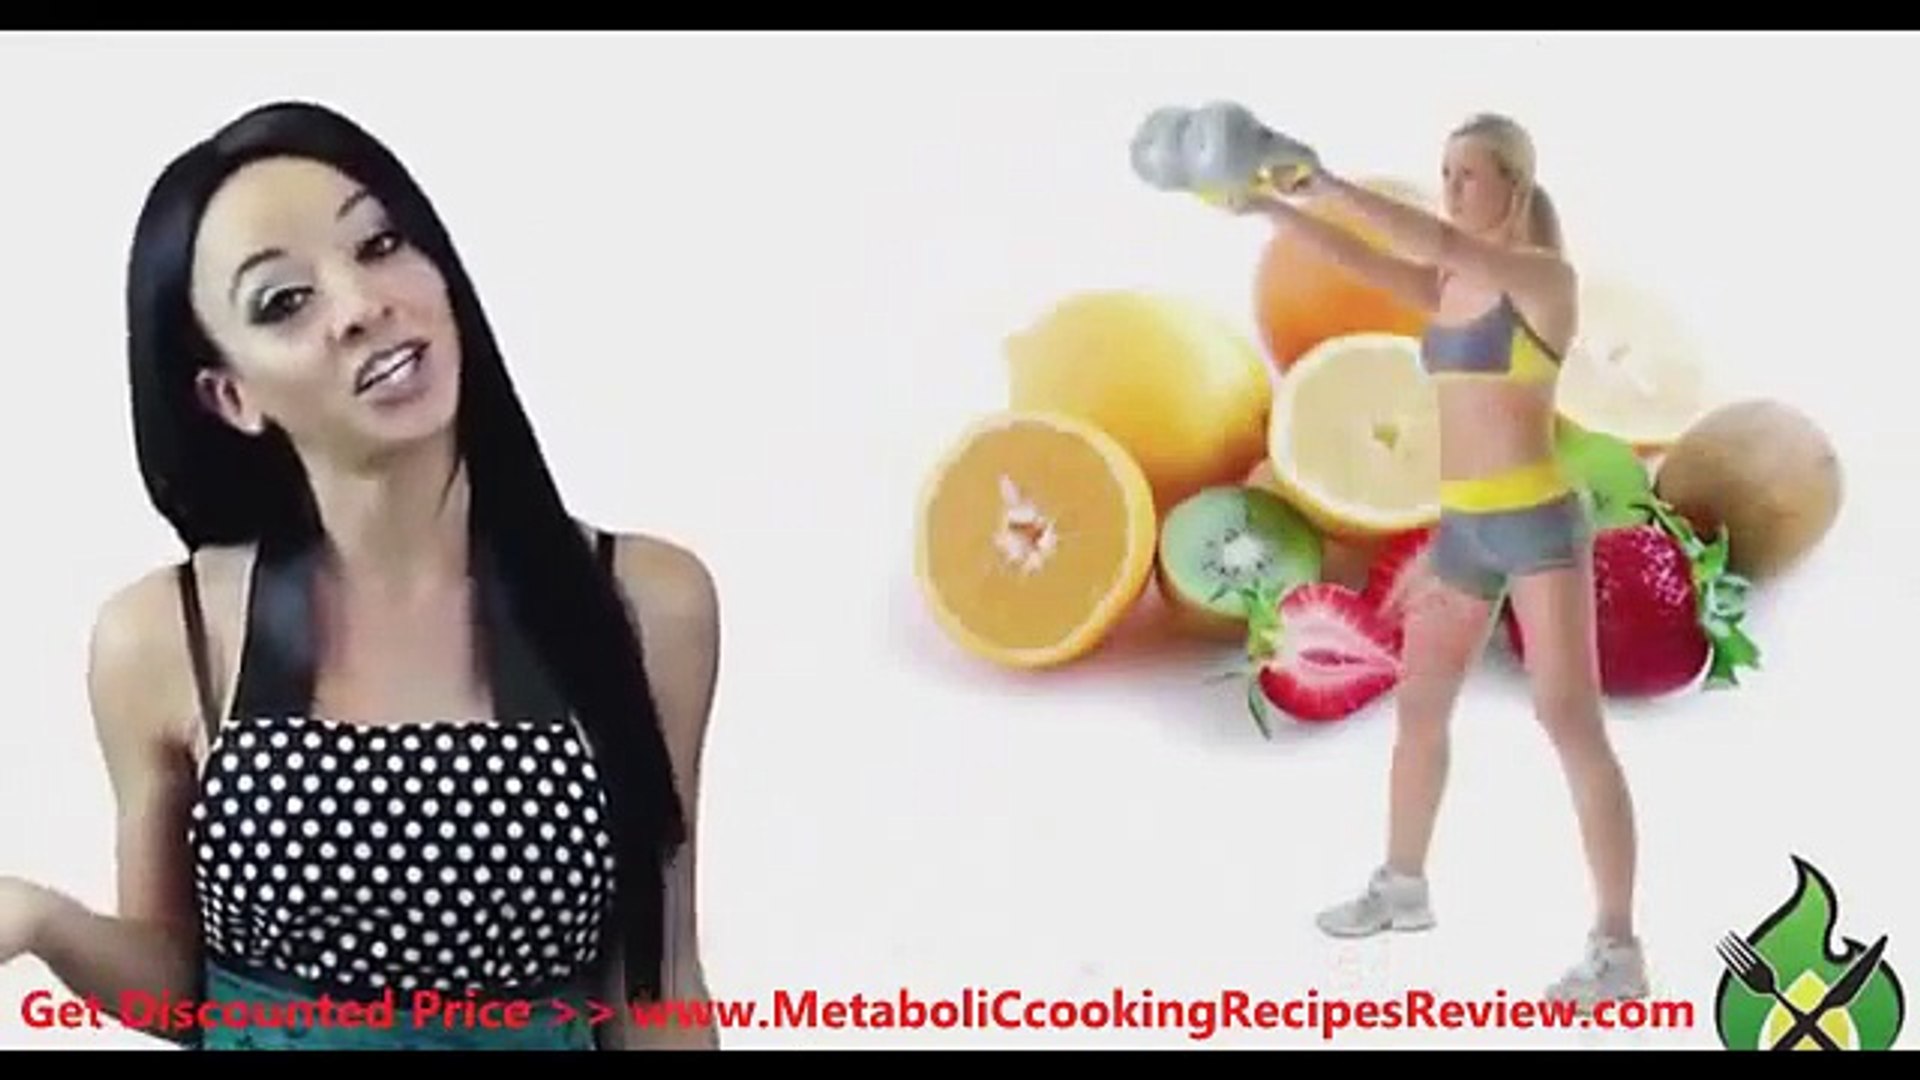 Metabolic Cooking fitness |Healthy cooking